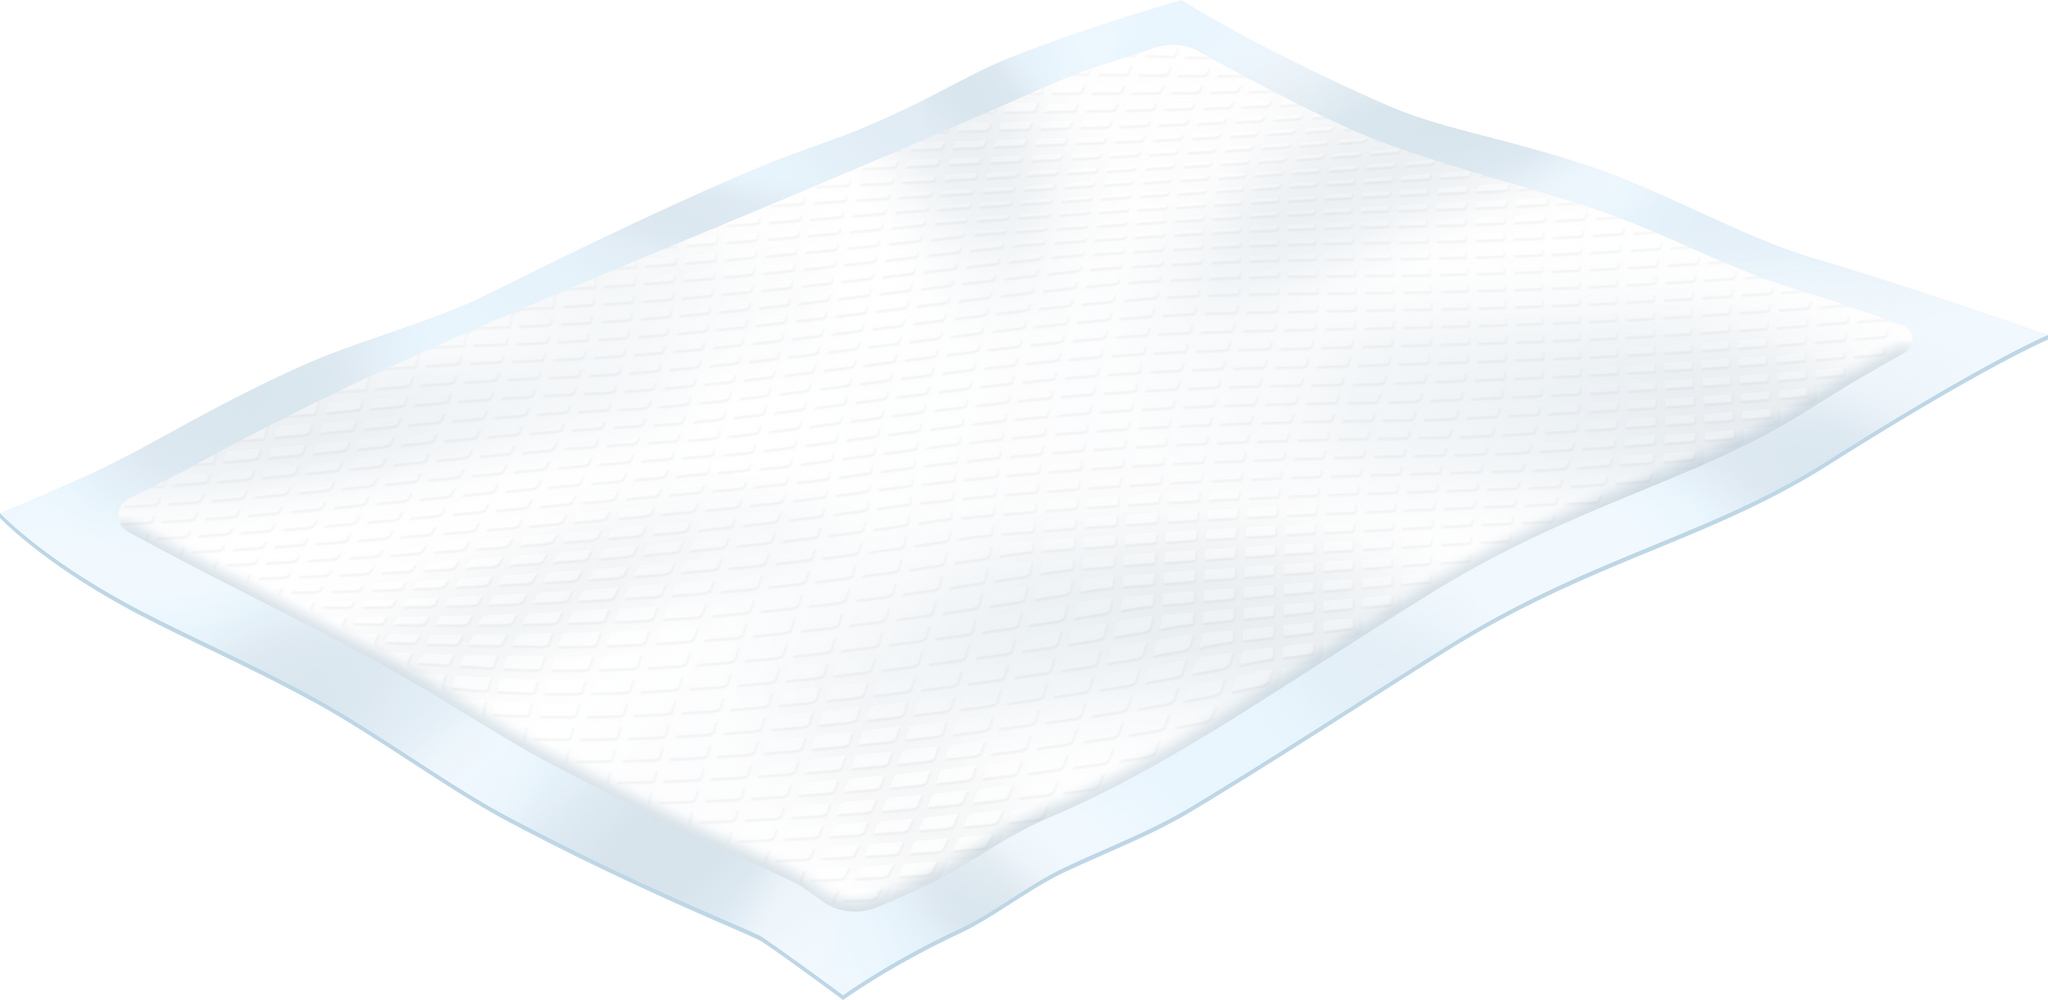 Lille Classic Bed Pads | Disposable | Extra | 60 x 90cm | Pack of 25